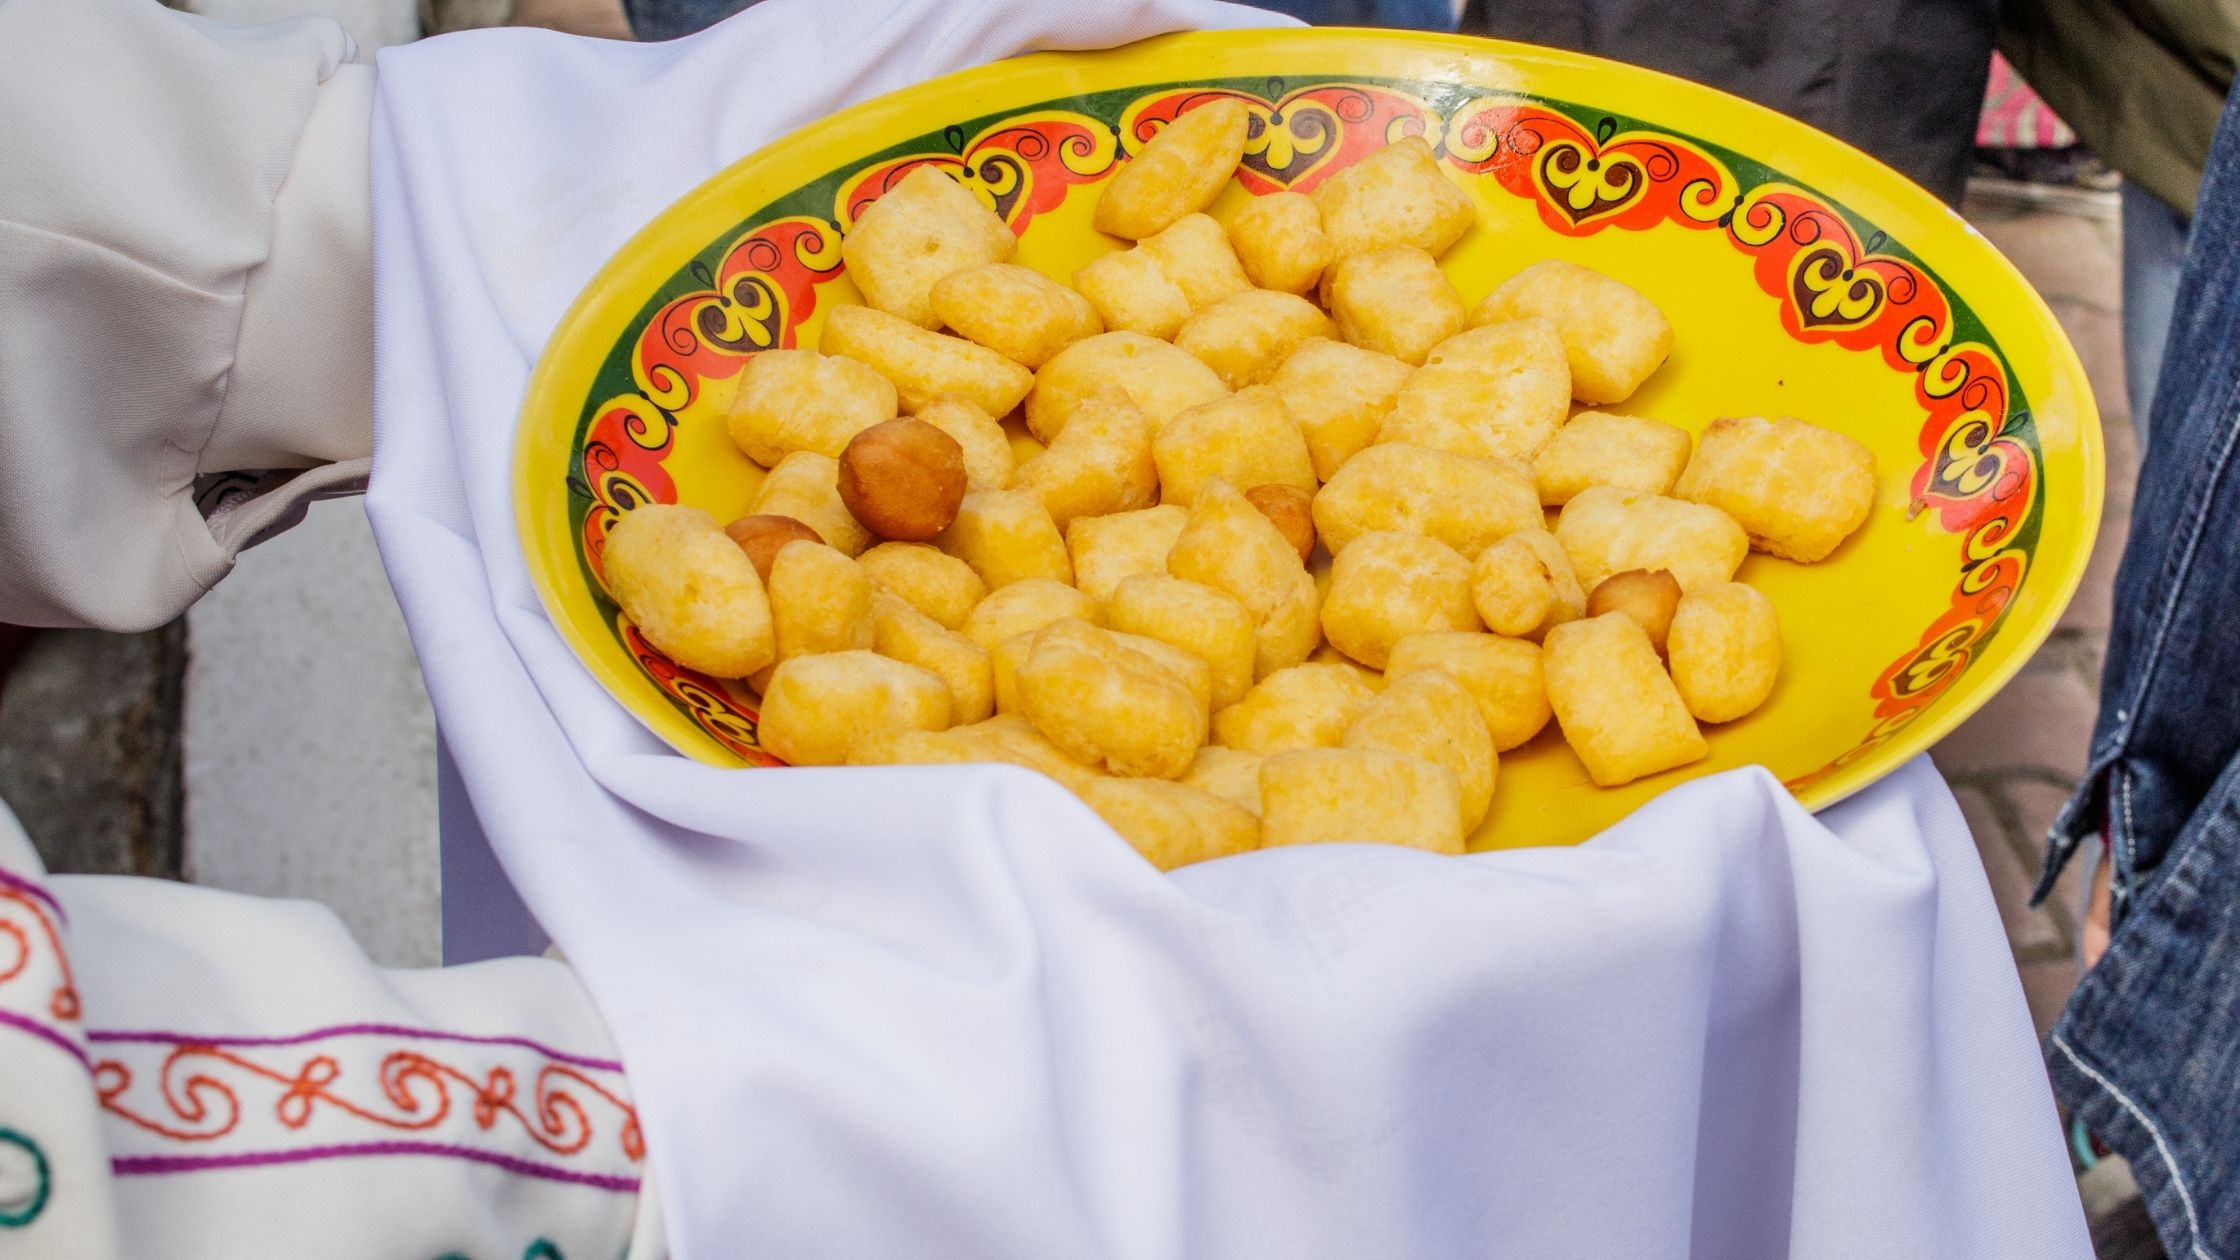 a plate full of a fried dough food 